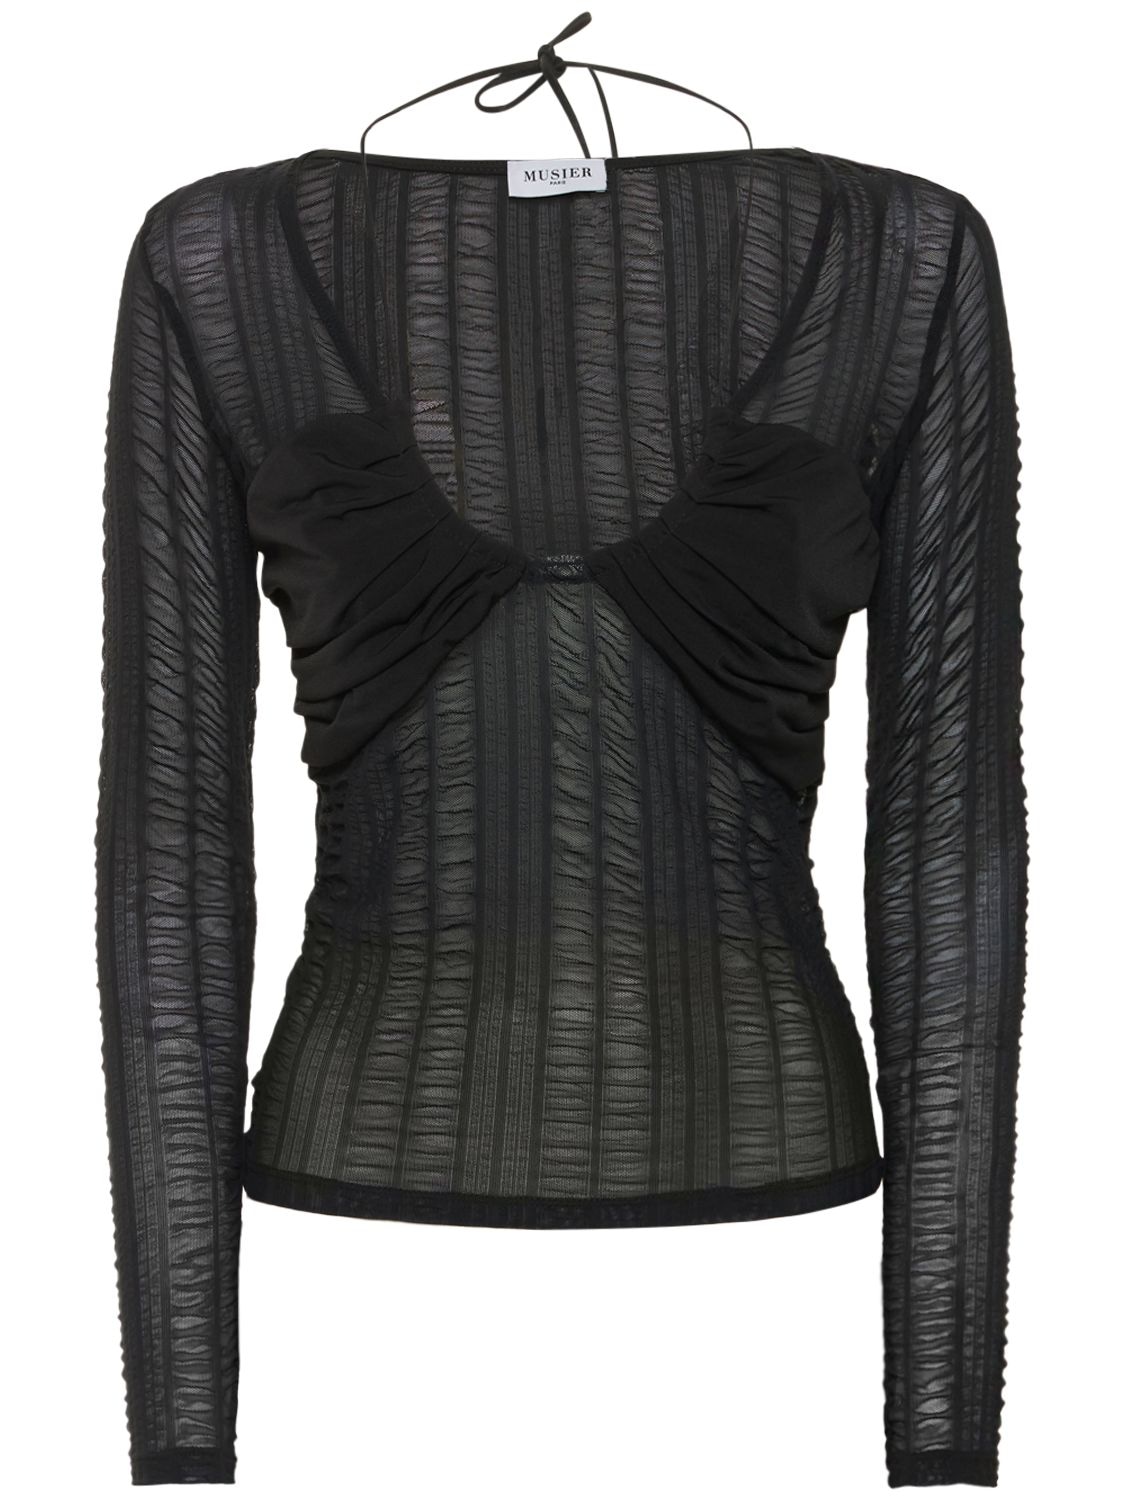 Musier Paris Anafi Stretch Jersey Gathered Top In Black | ModeSens